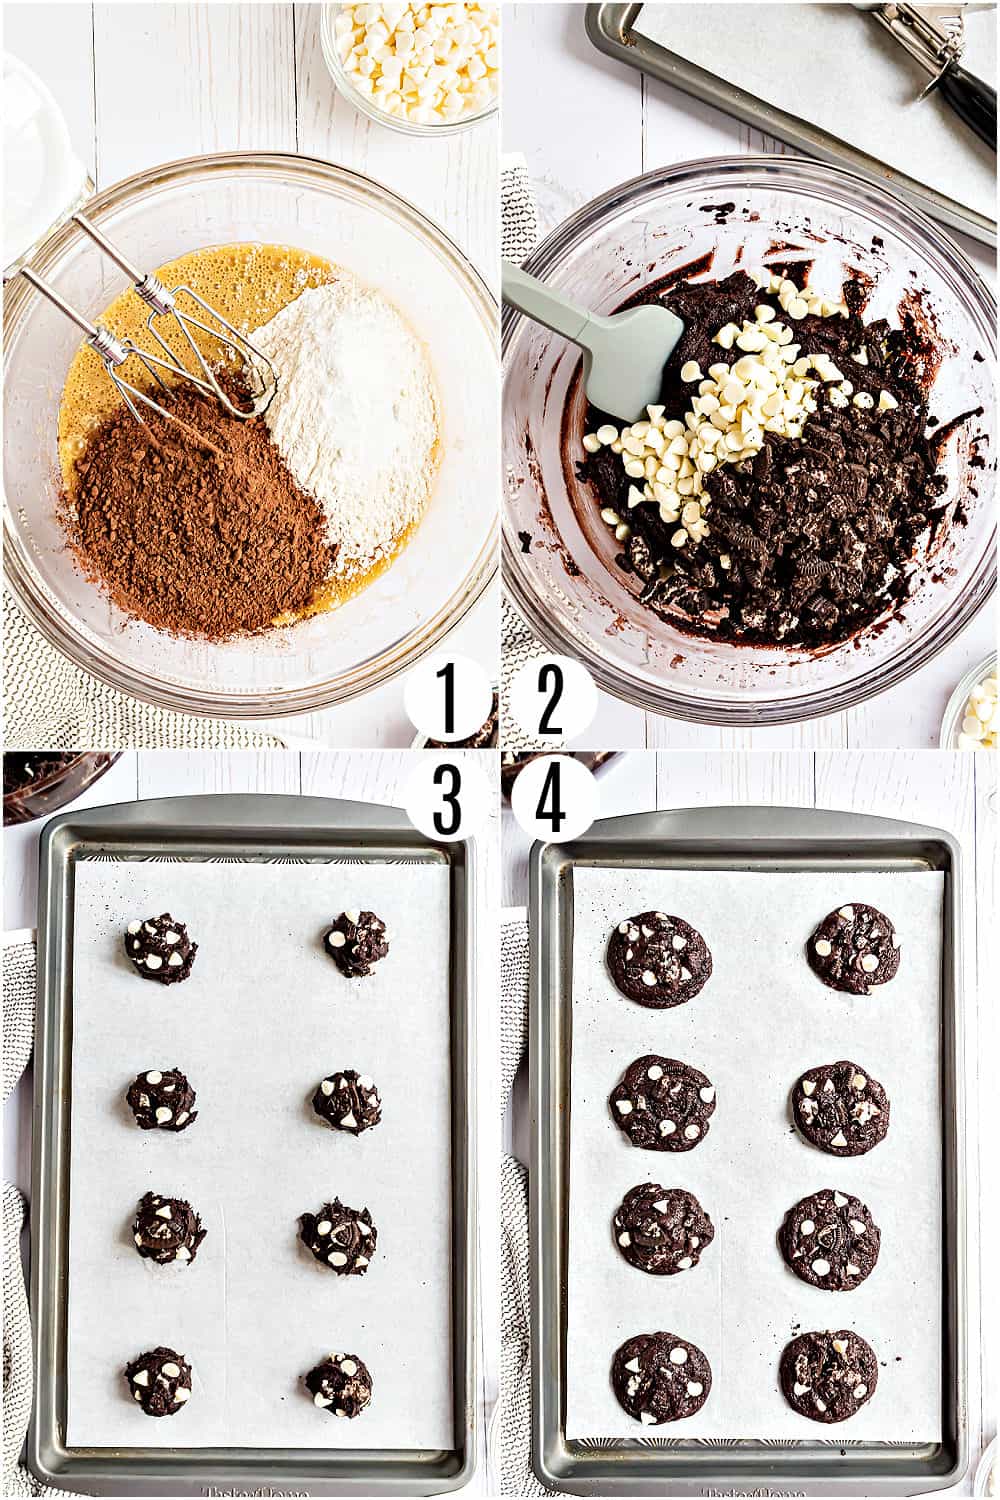 Step by step photos showing how to make cookies and cream cookies.